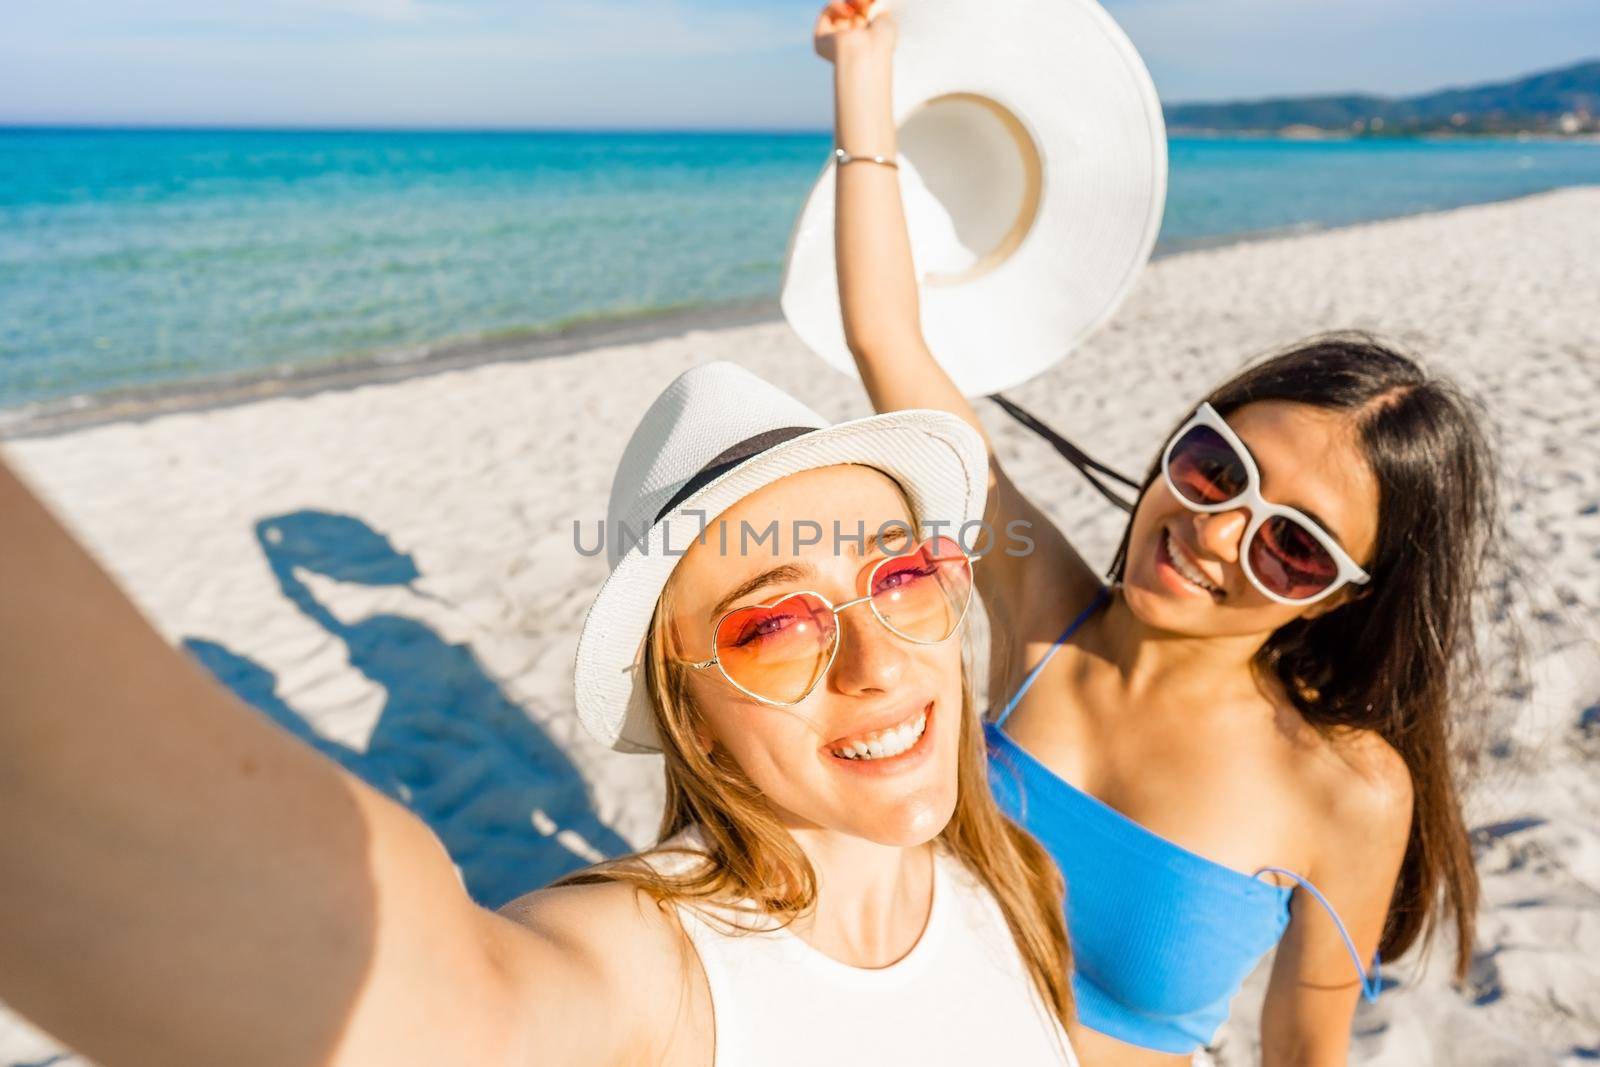 Two beautiful girls with white hats taking a self-portrait enjoying summer vacation on tropical beach resort. POV of young blonde woman using smartphone to photograph herself with best teen friend